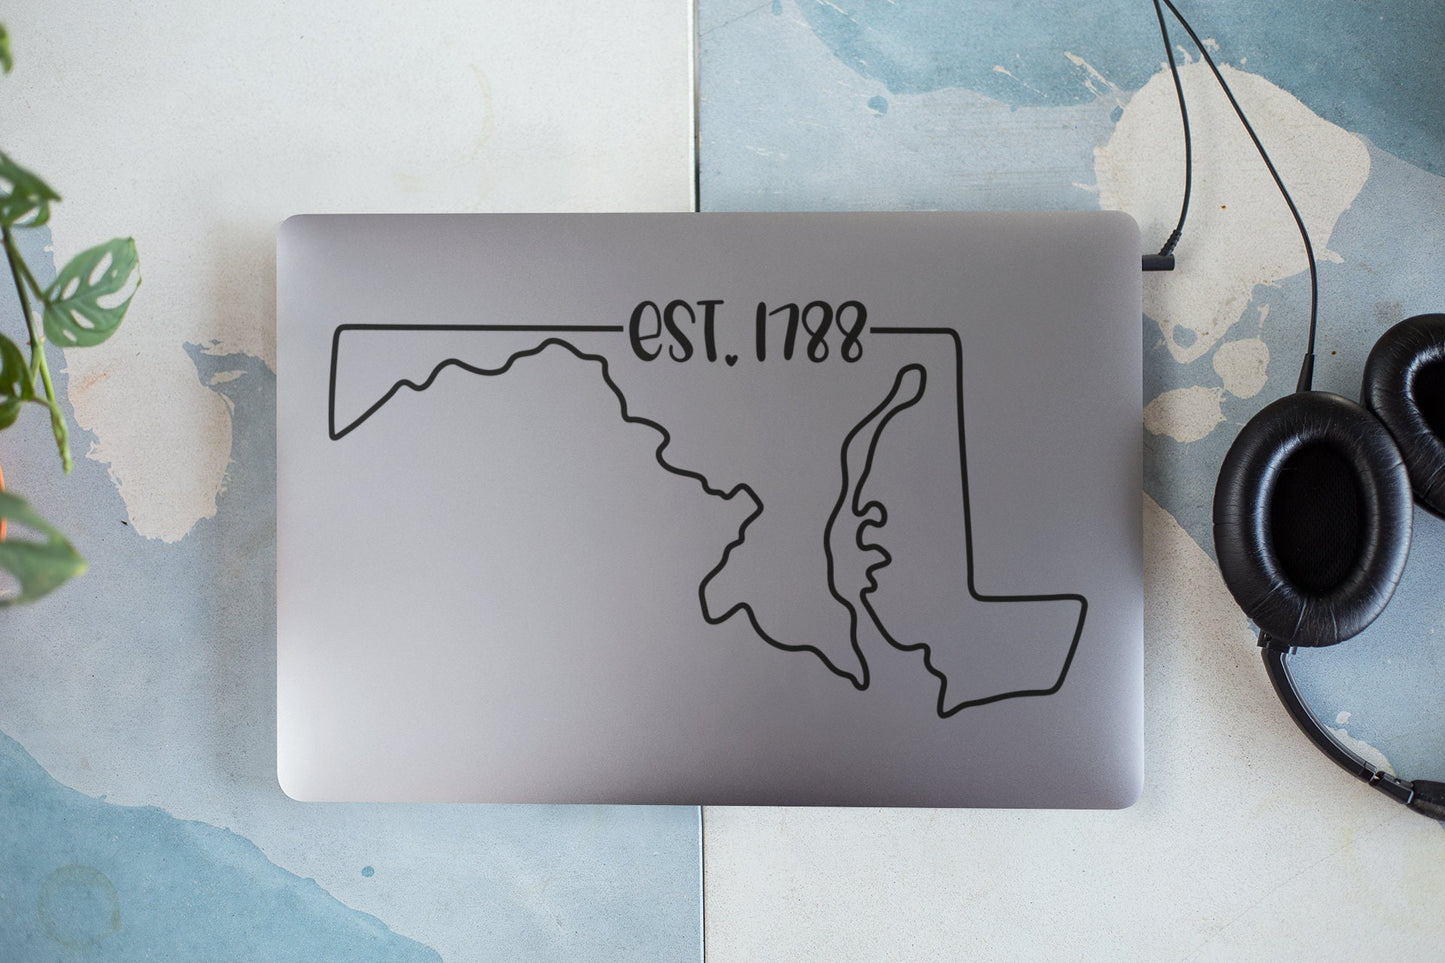 Maryland EST. 1788 Decal - Many Colors & Sizes